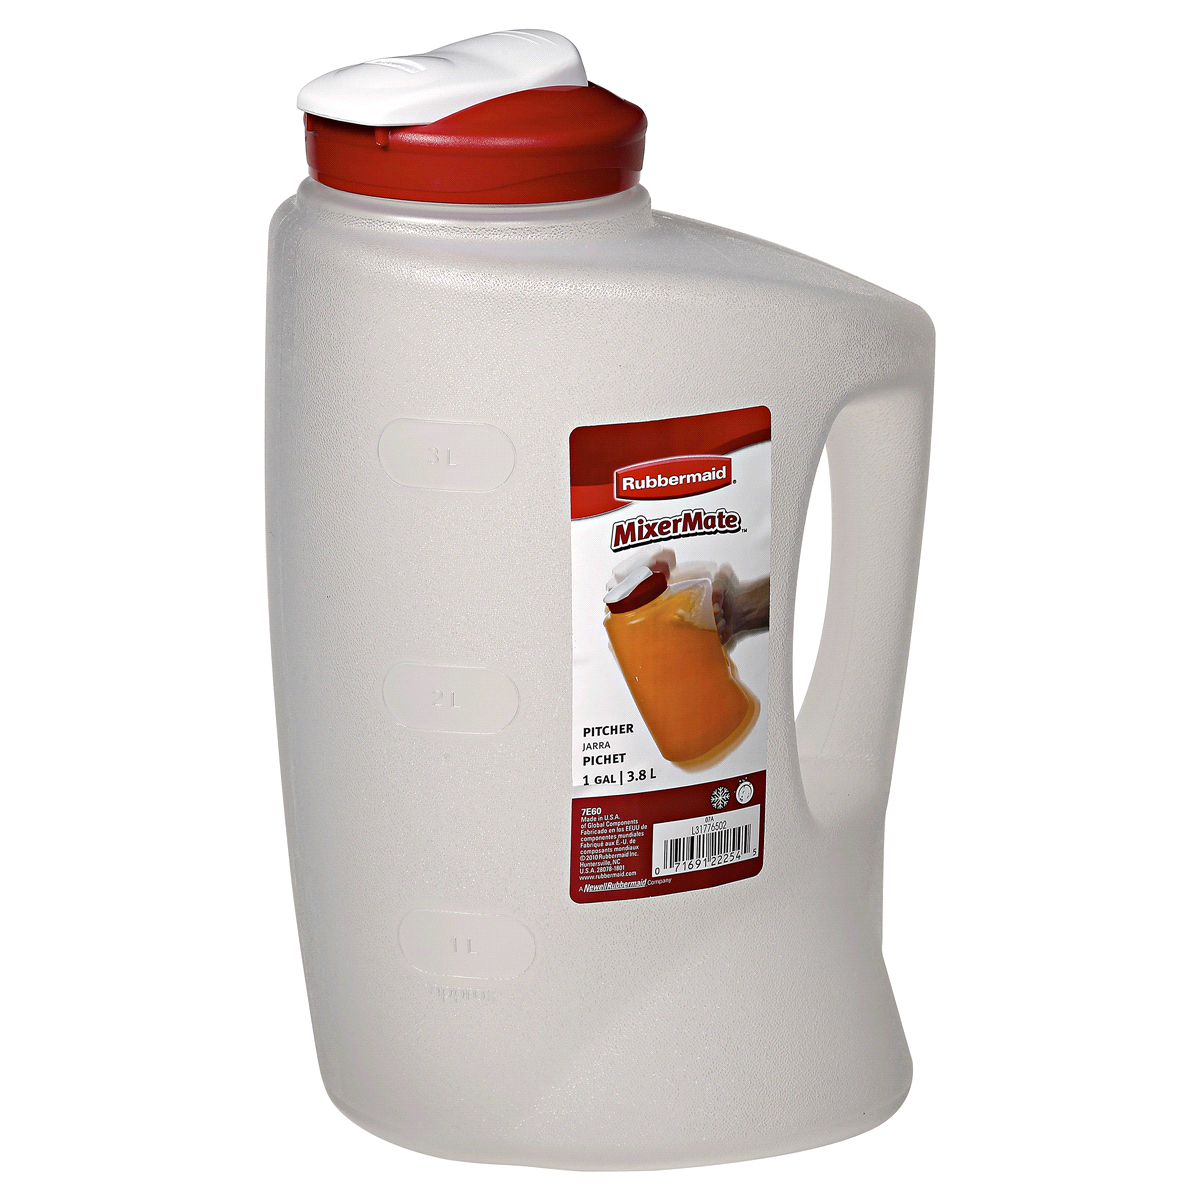 slide 3 of 3, Rubbermaid MixerMate Pitcher, 1 gal